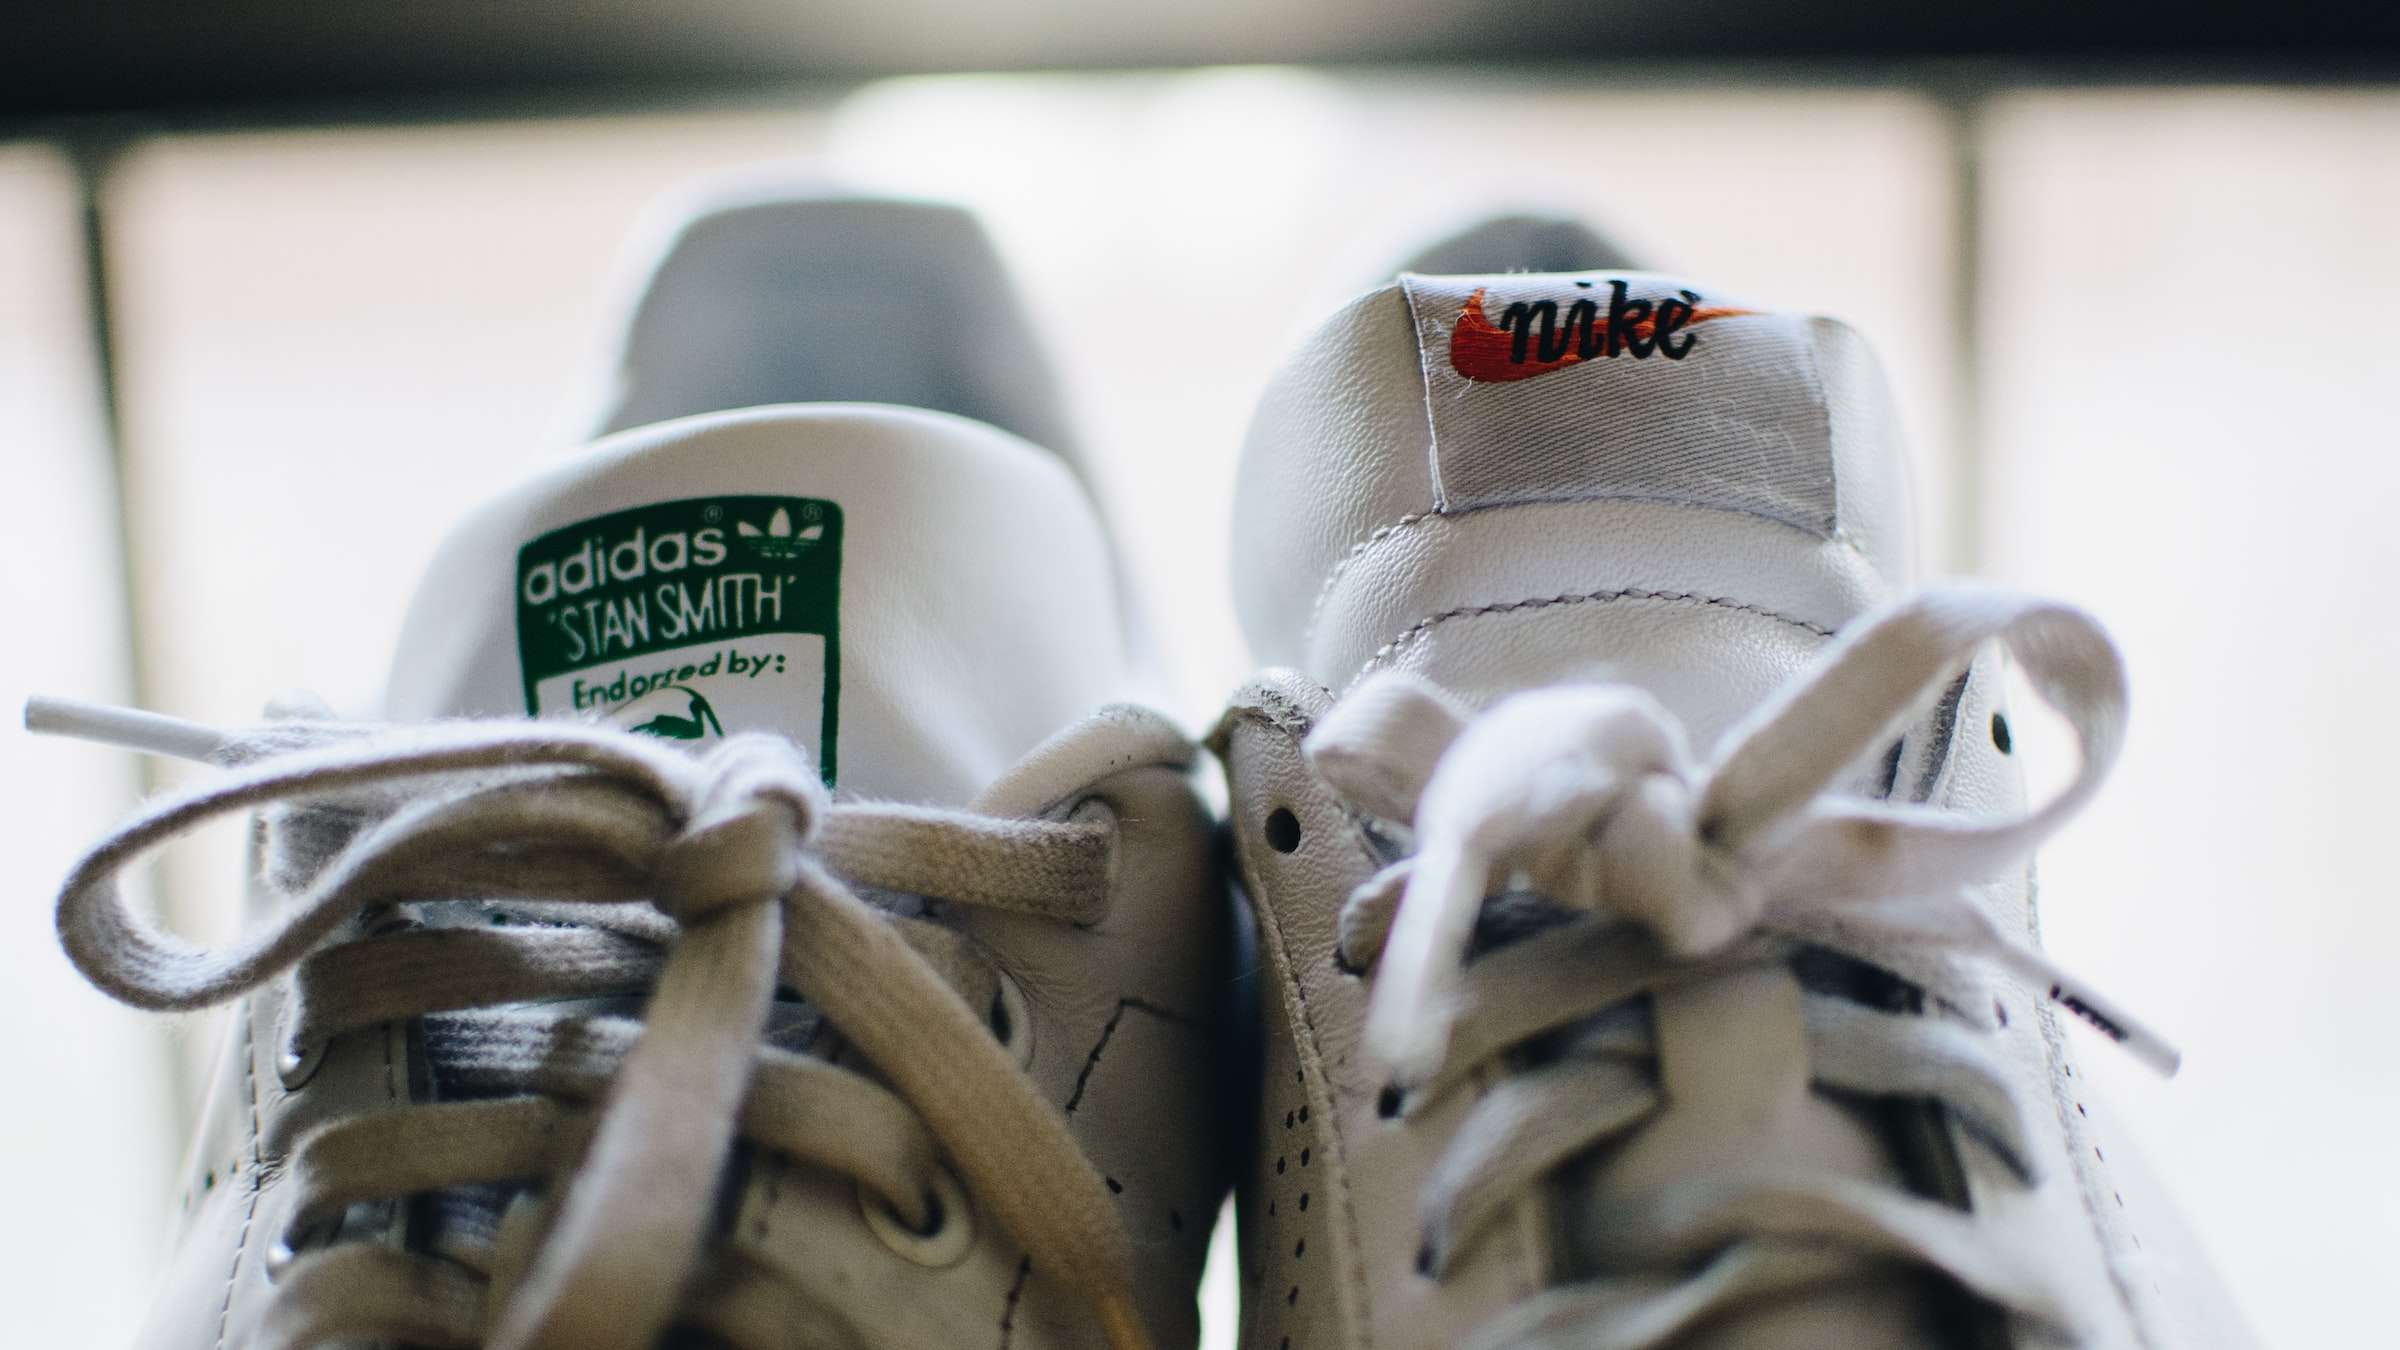 Adidas Stan Smith vs Superstar: Which Iconic Sneaker Comes Out on